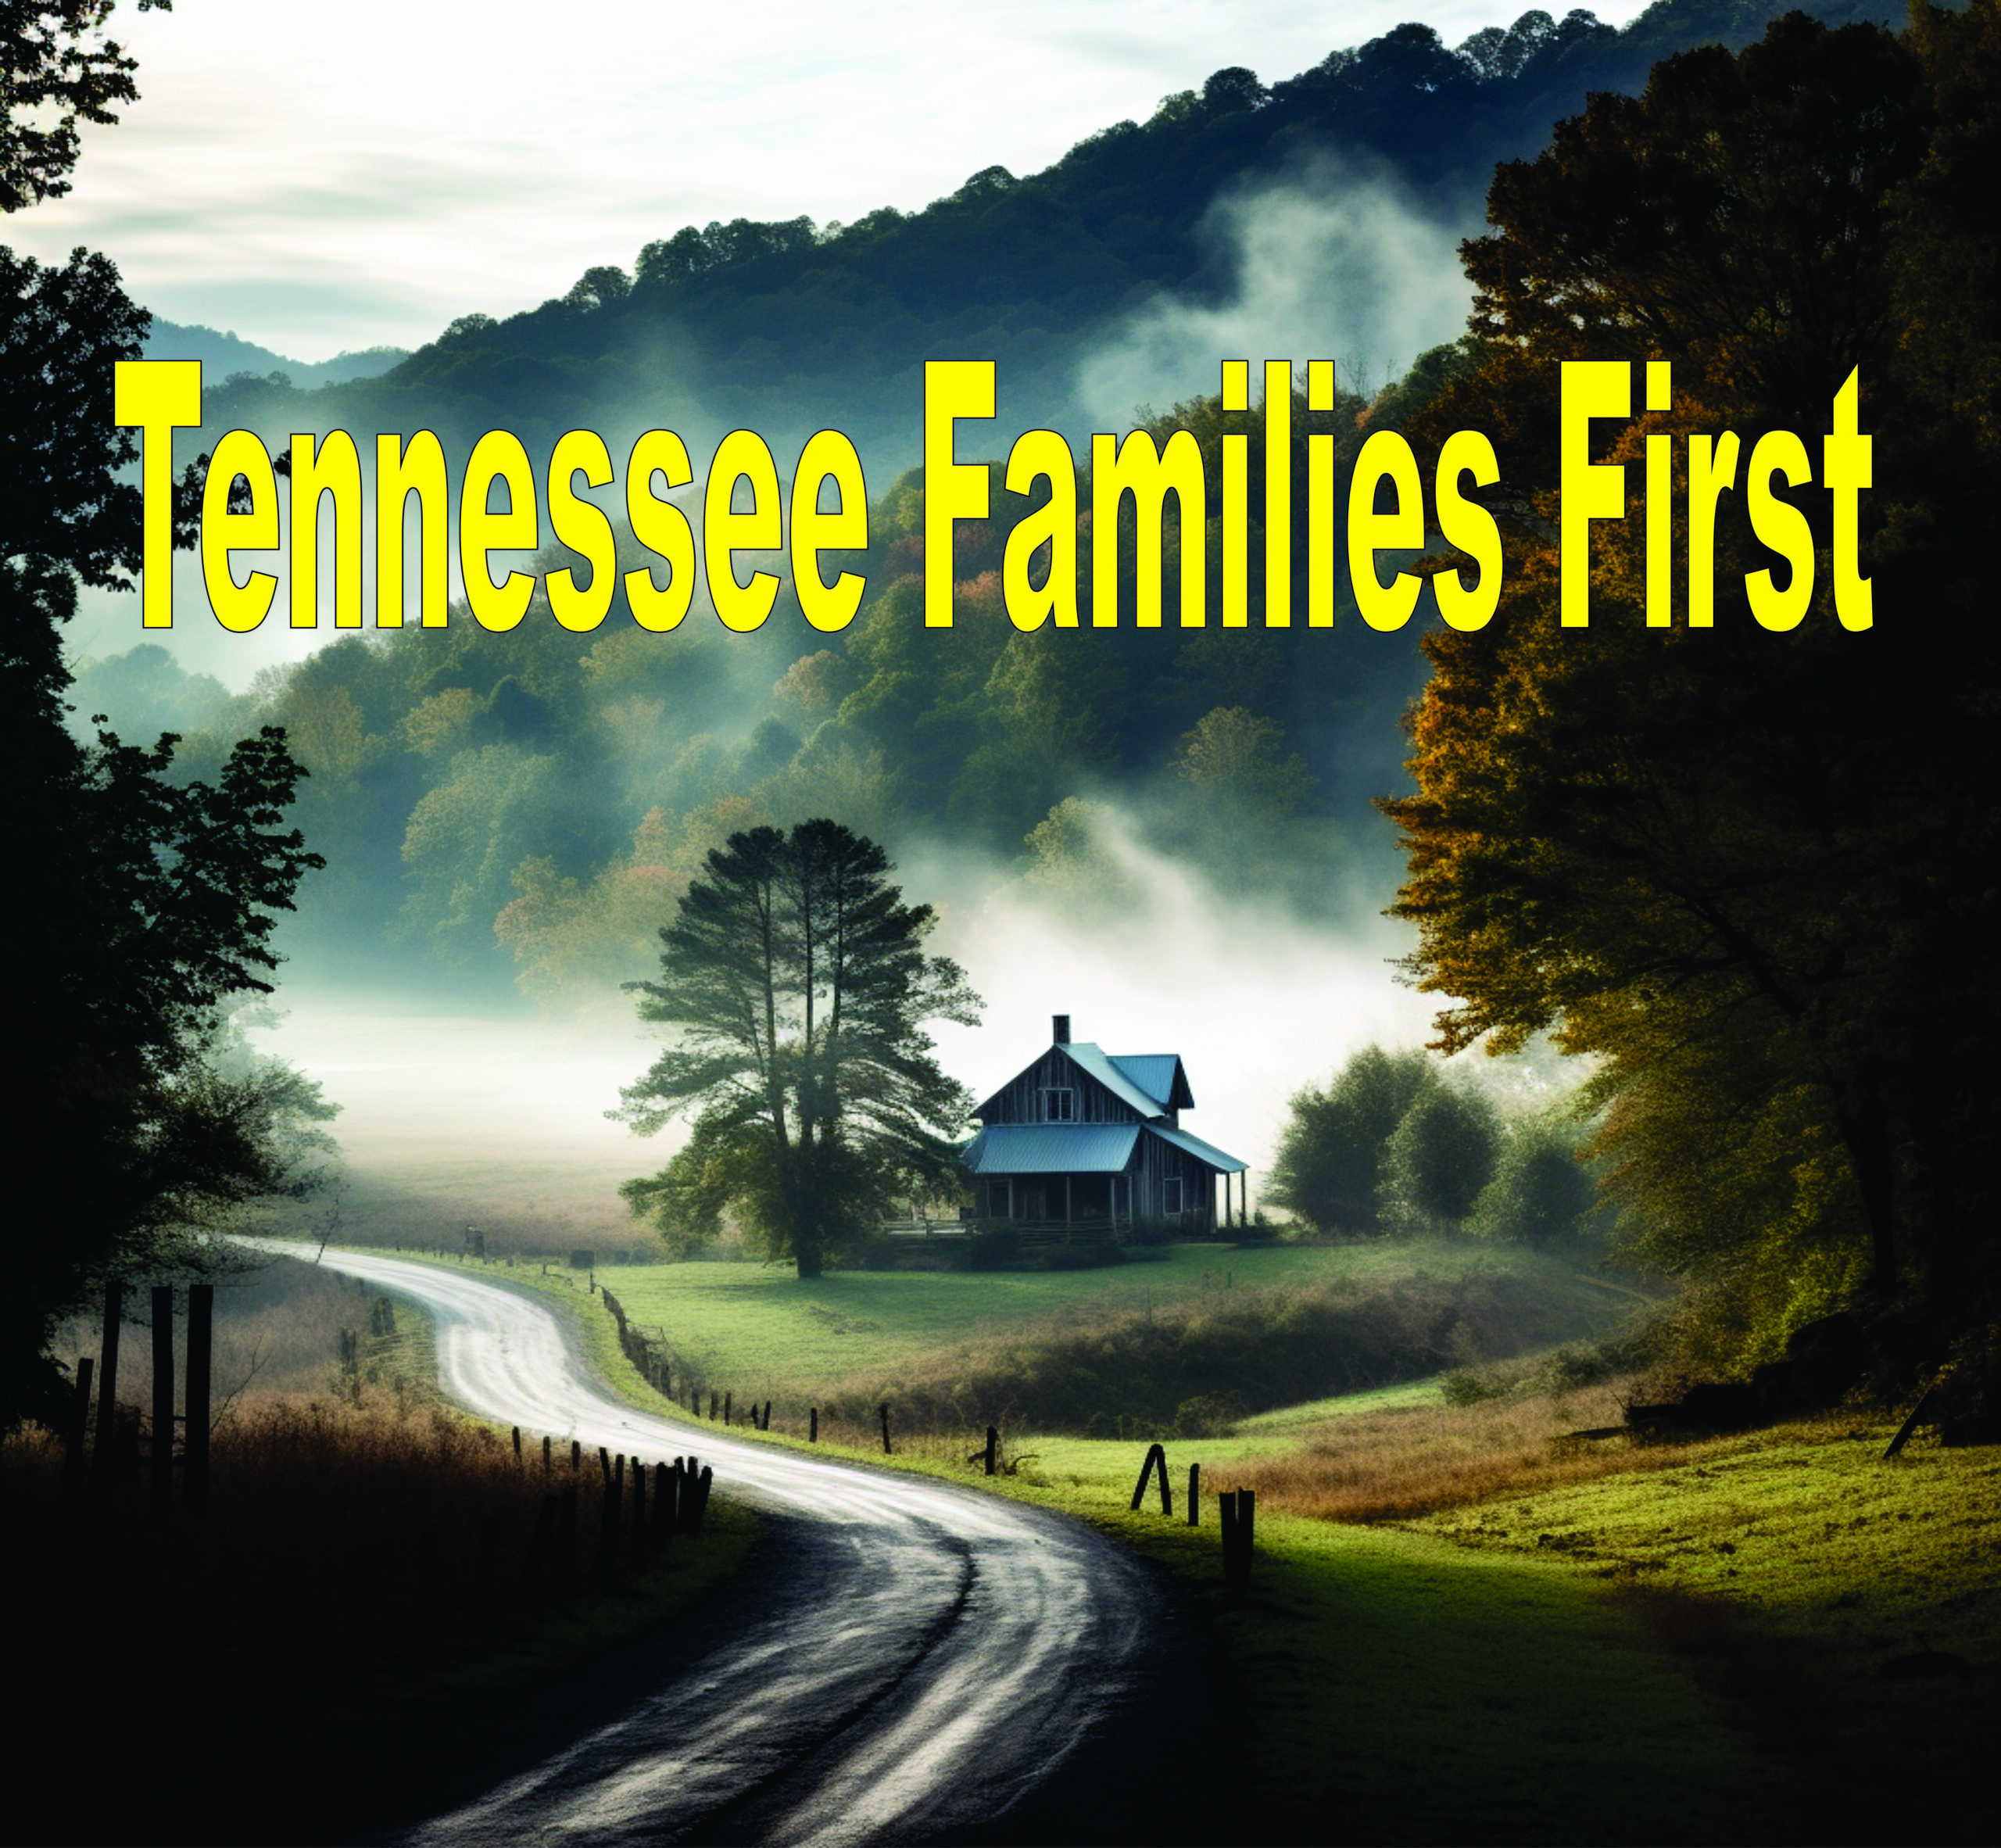 Tennessee Families First